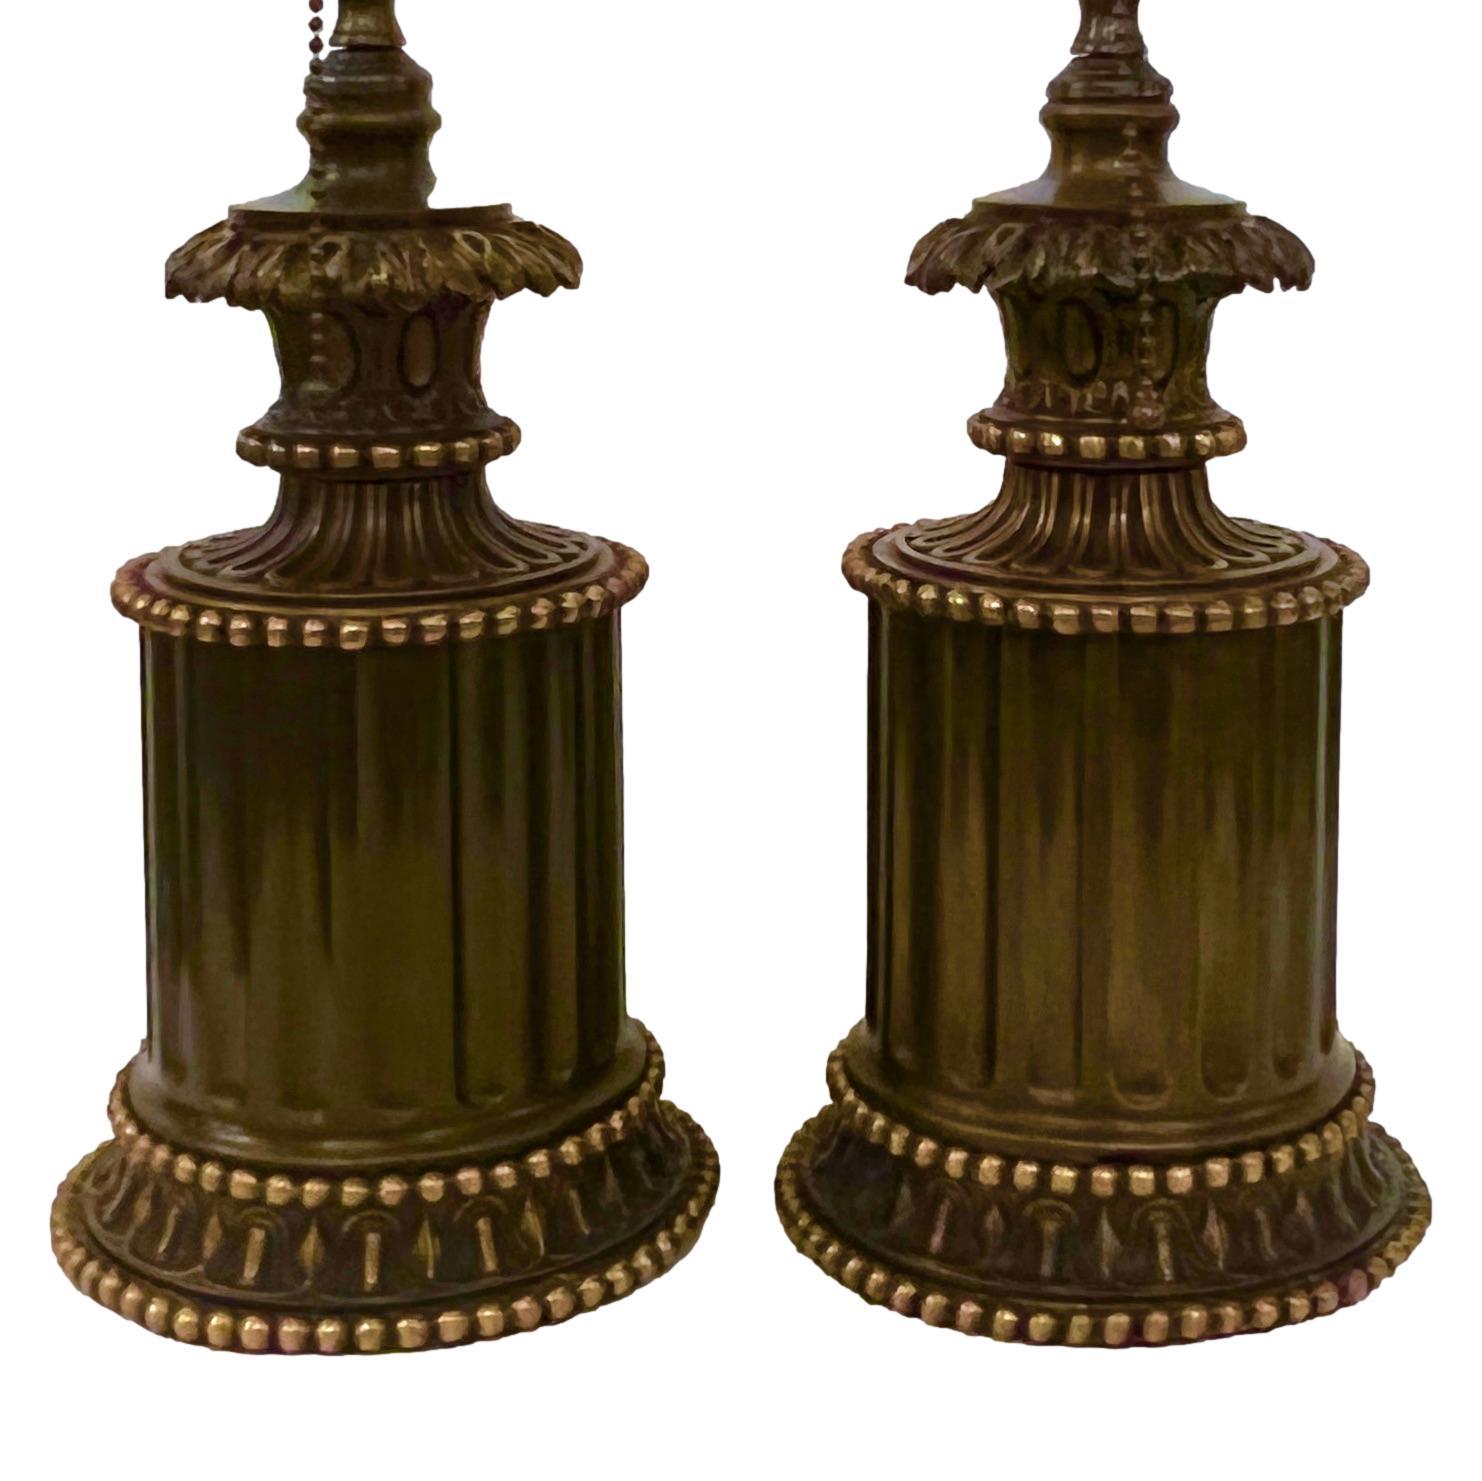 Pair of circa 1900 French oil lamps with patinated and gilt finish, electrified.

Measurements:
Height of Body: 11